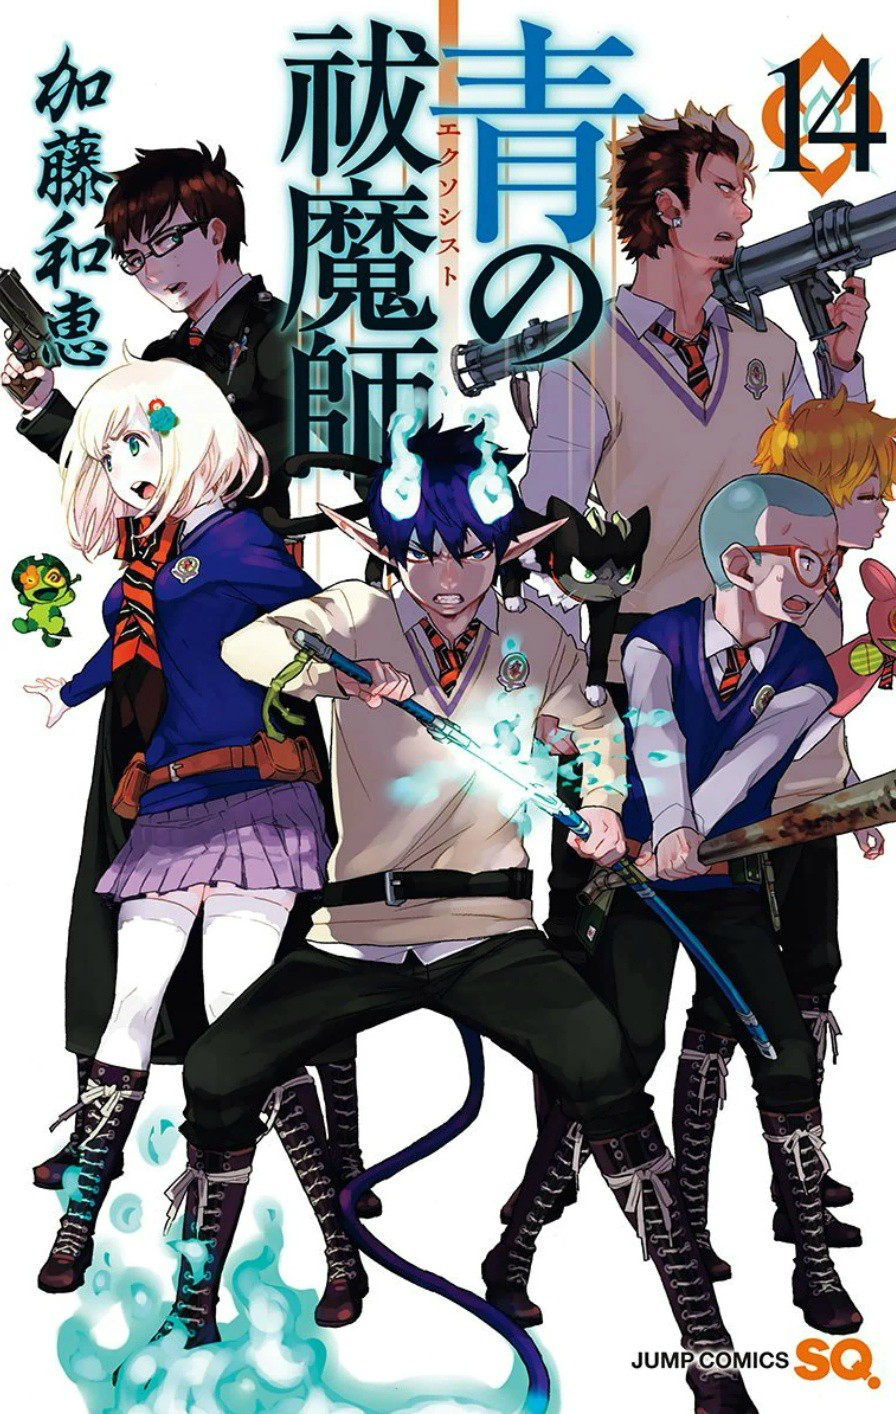 Blue Exorcist Kyoto Saga Episode 7 Review - Crow's World of Anime